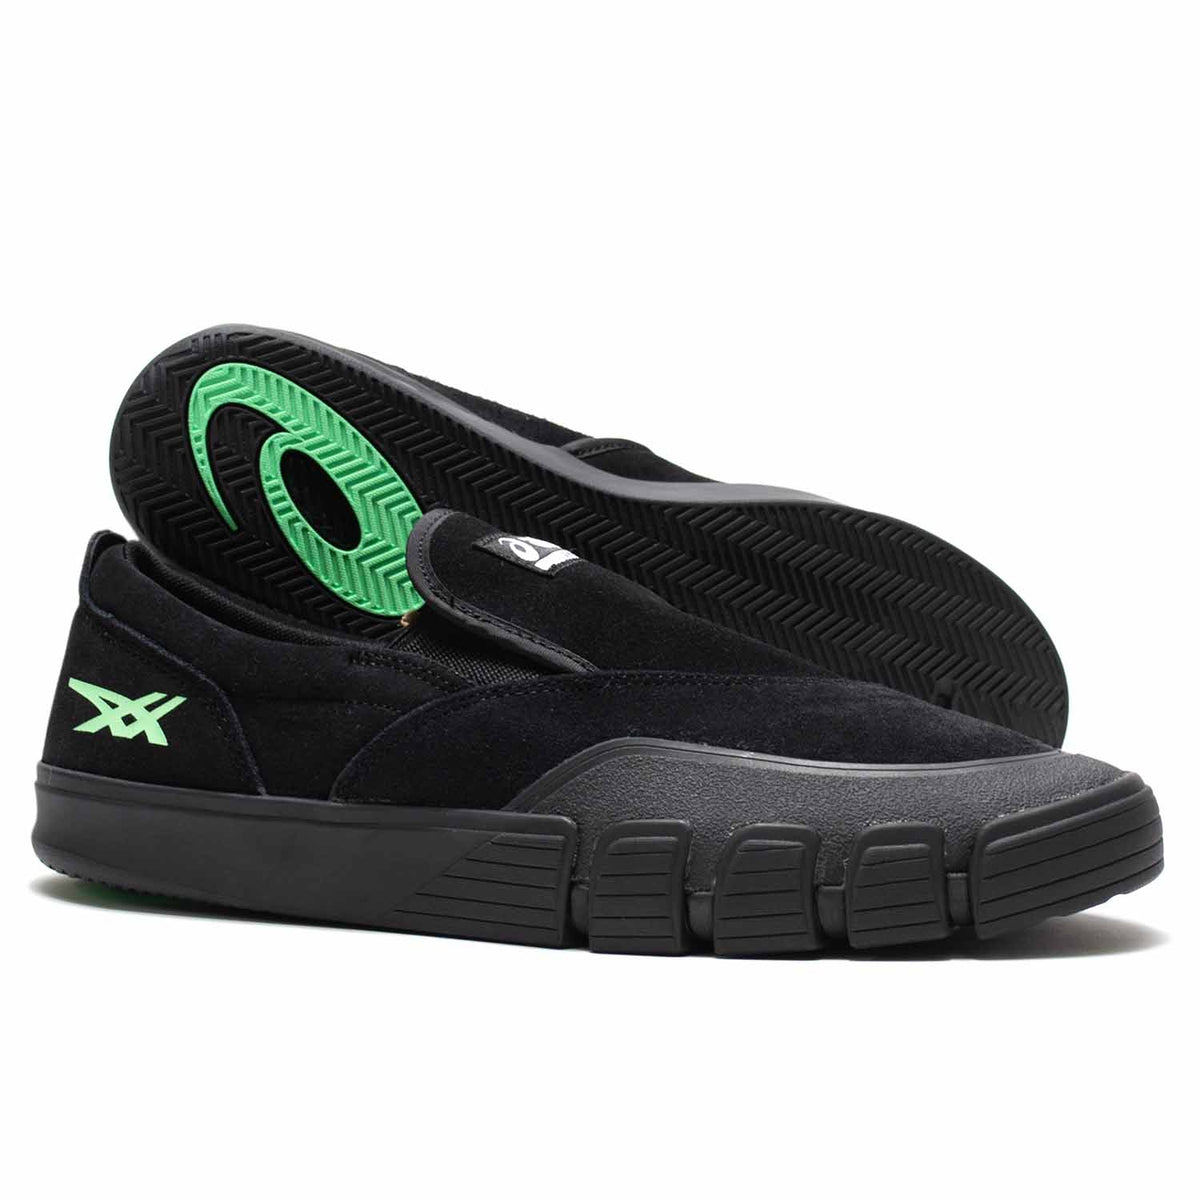 Asics Black slip on shoe with black sole and green asics logo. Chunky outer sole. Suede shoe. Black rubber toe cap.